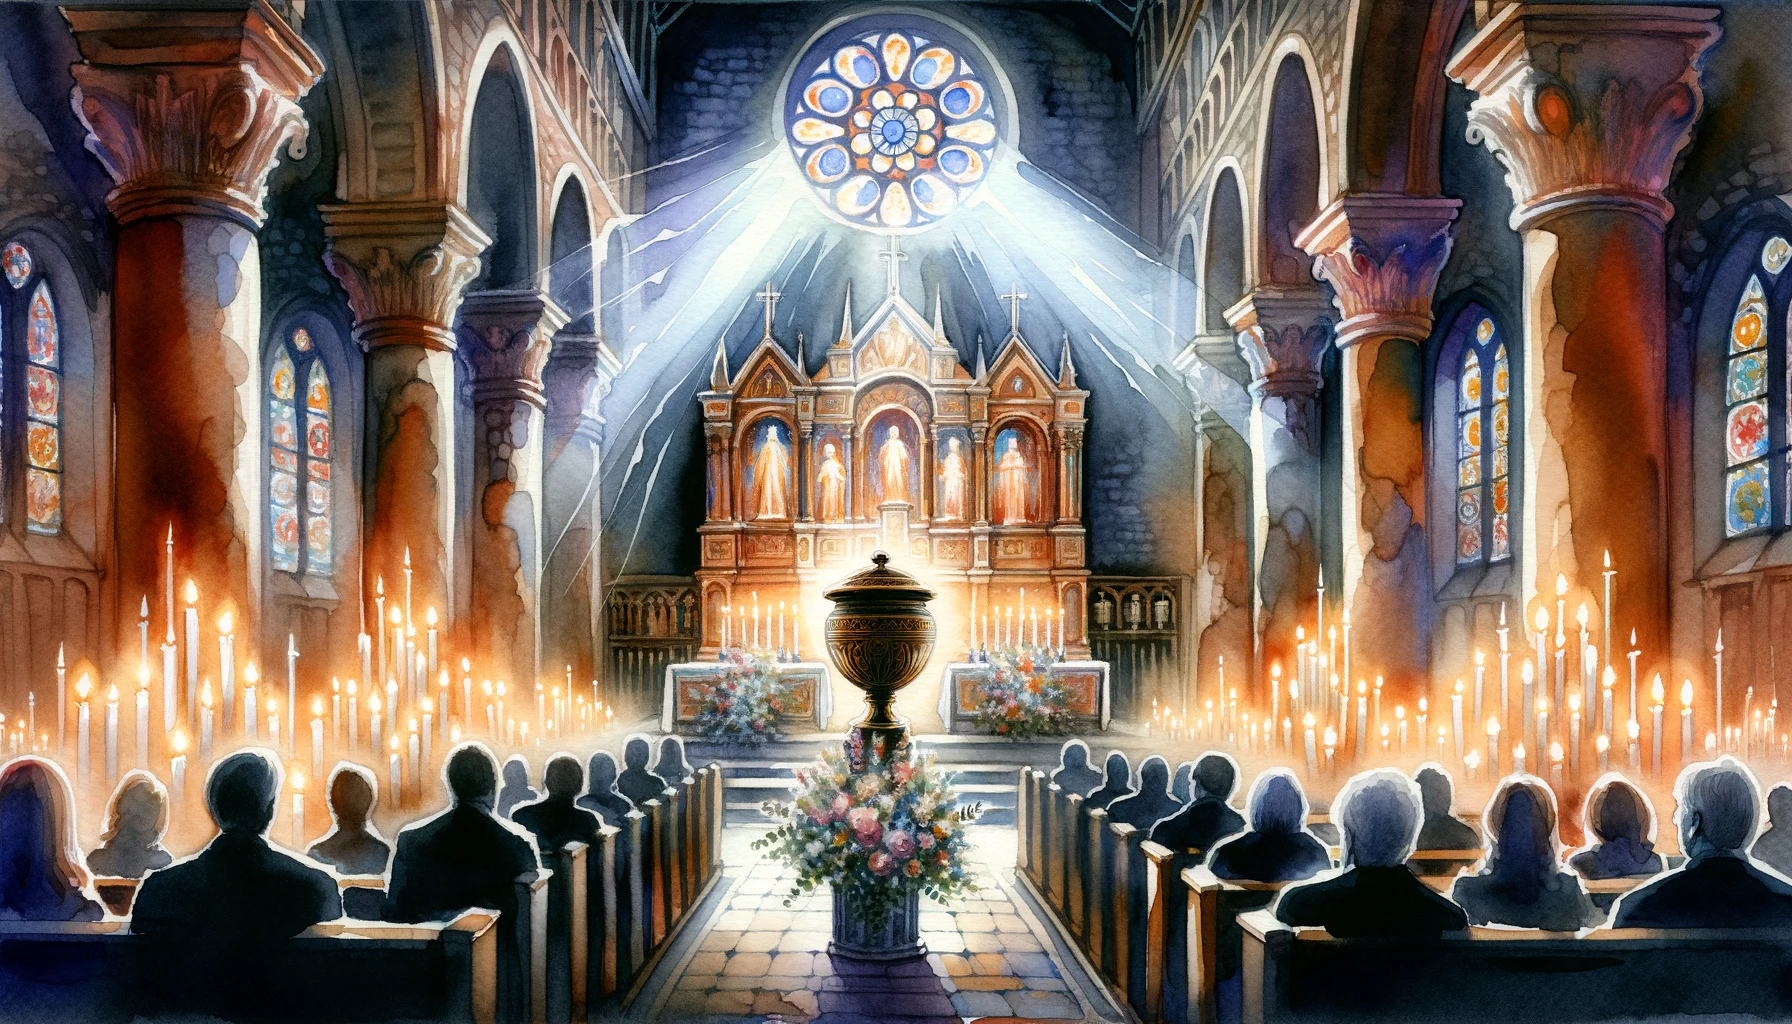 Serene church ambiance with candles, stained glass. People in pews pray and reflect. Central altar holds urn, flowers, bathed in divine light.